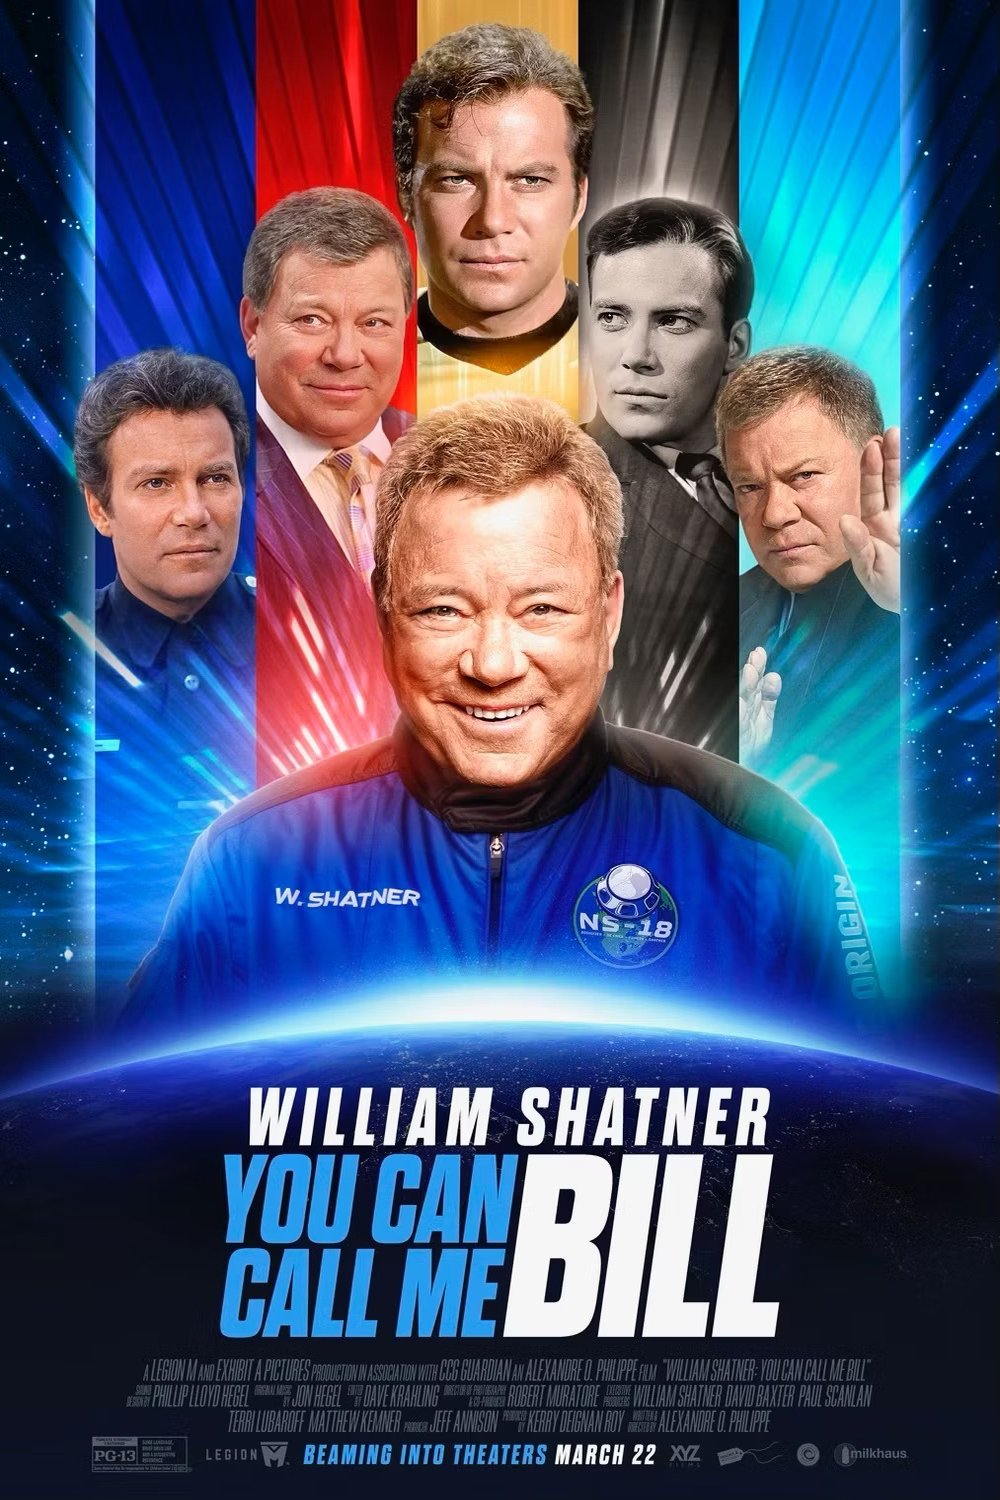 Poster of the movie William Shatner: You Can Call Me Bill